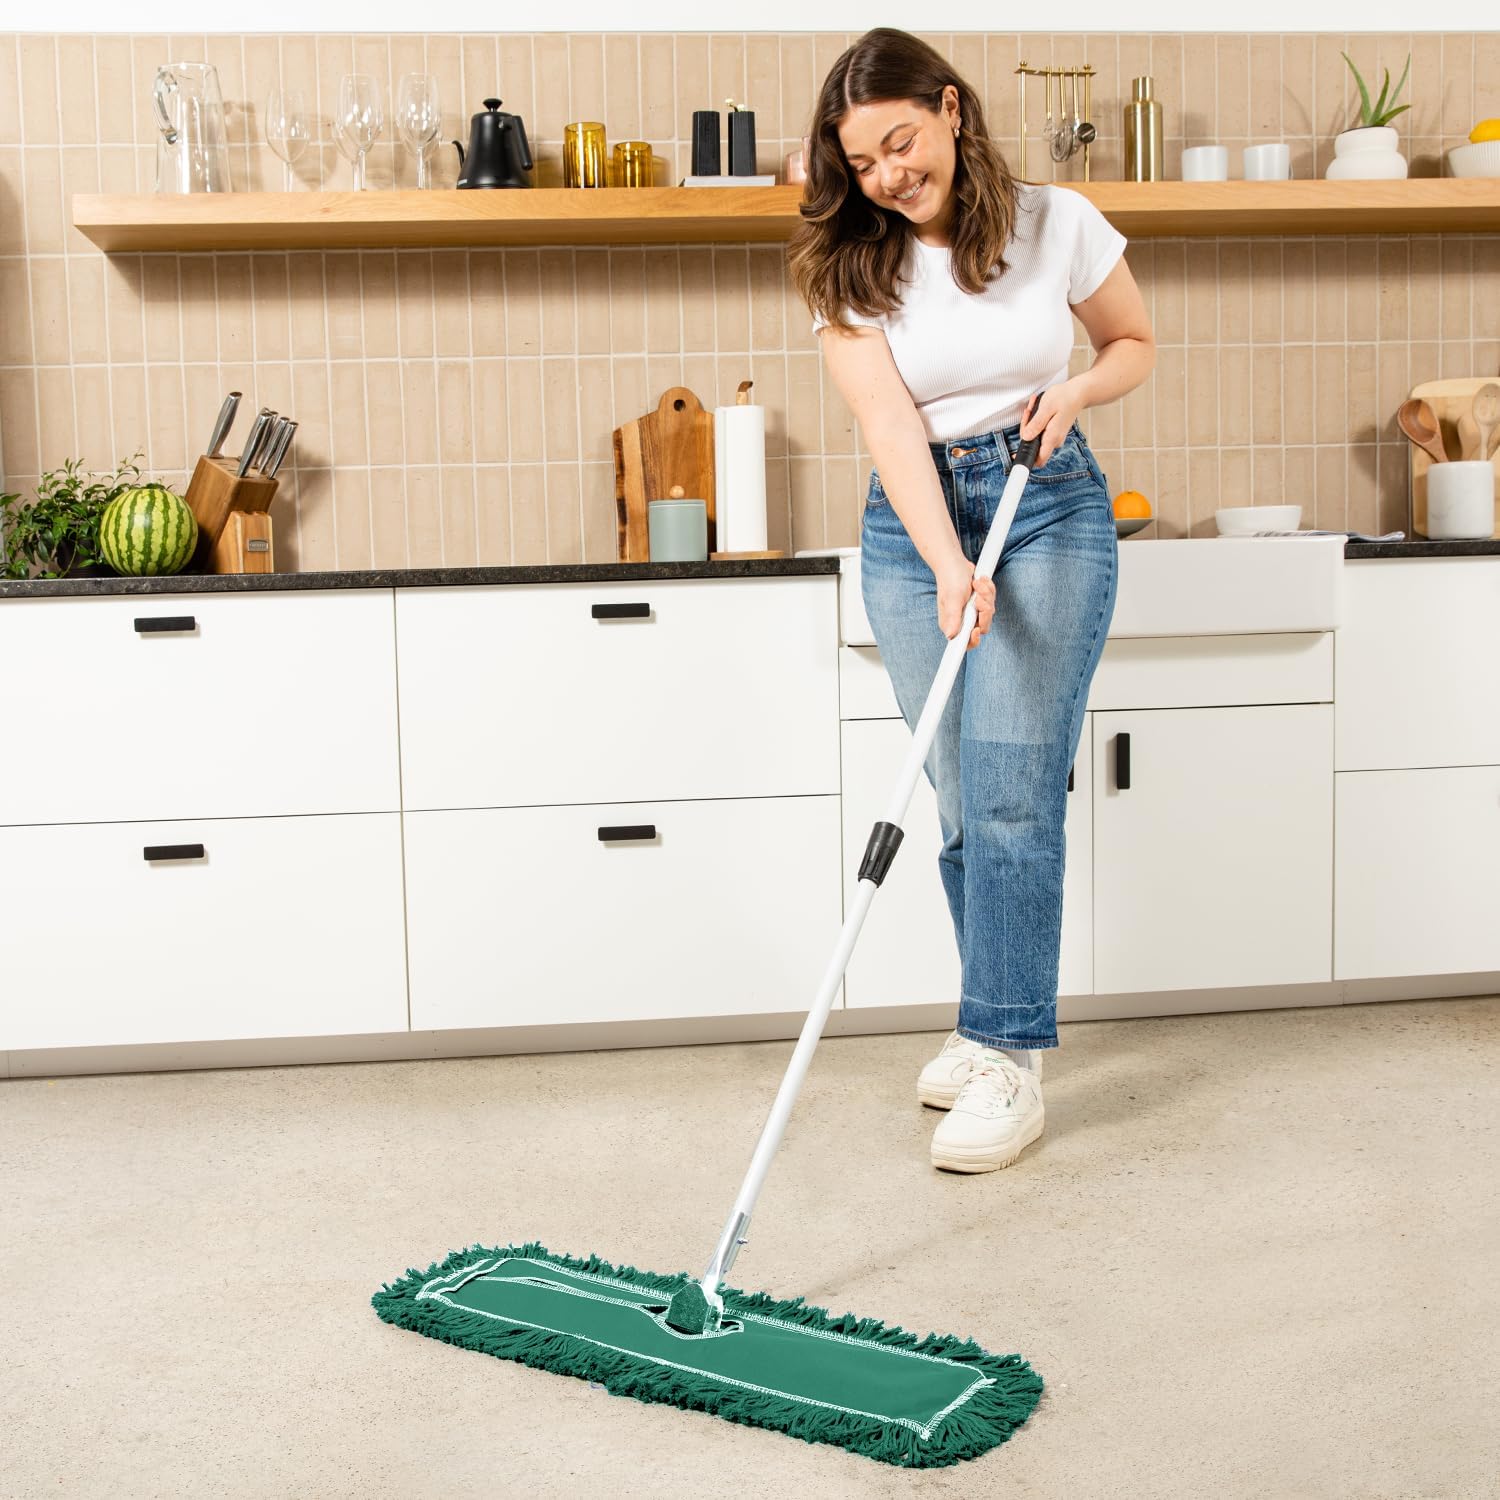 Tidy Tools 48 inch Dust Mop Kit Extendable Handle, Green